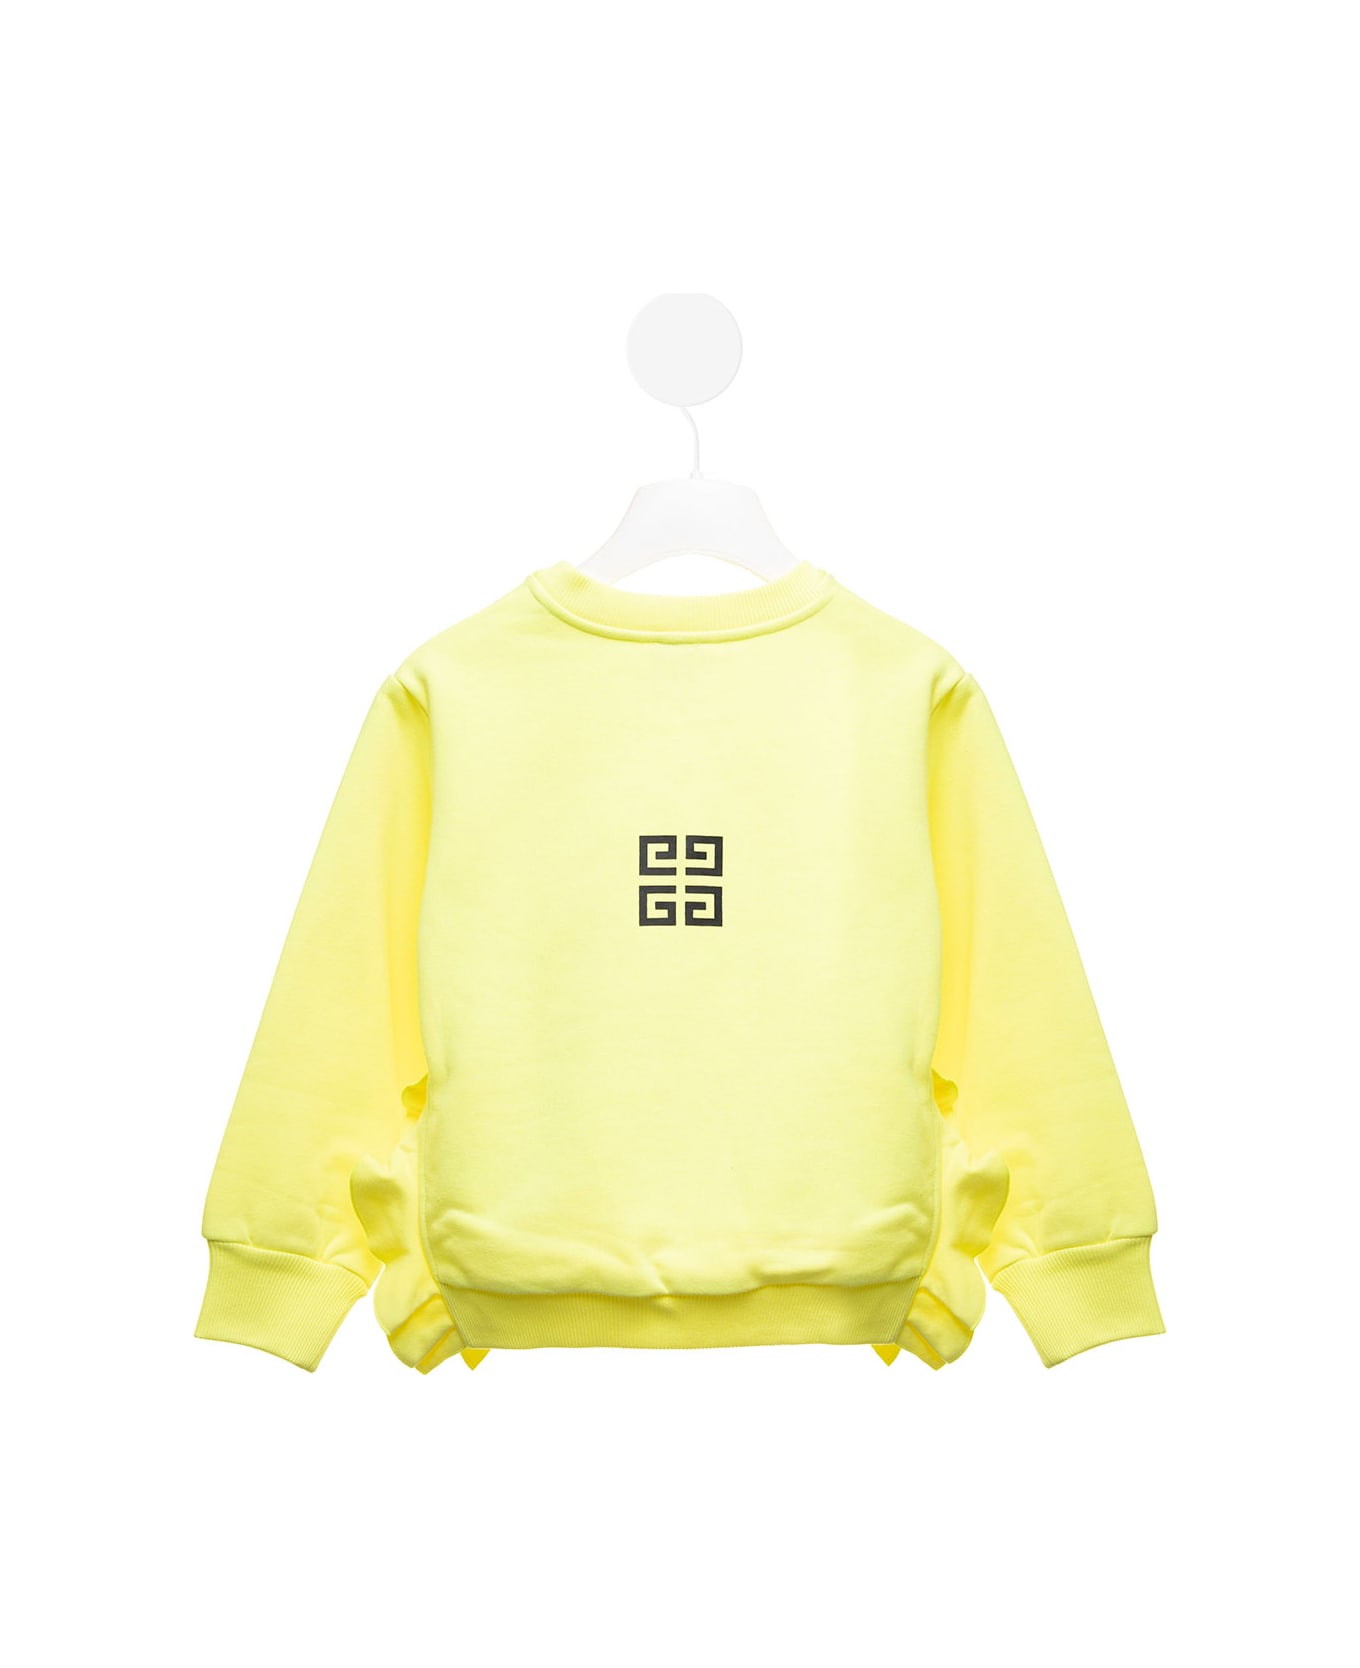 Givenchy Yellow Jersey Sweatshirt With Logo And Ruffles Detail Givenchy Kids Girl - Yellow